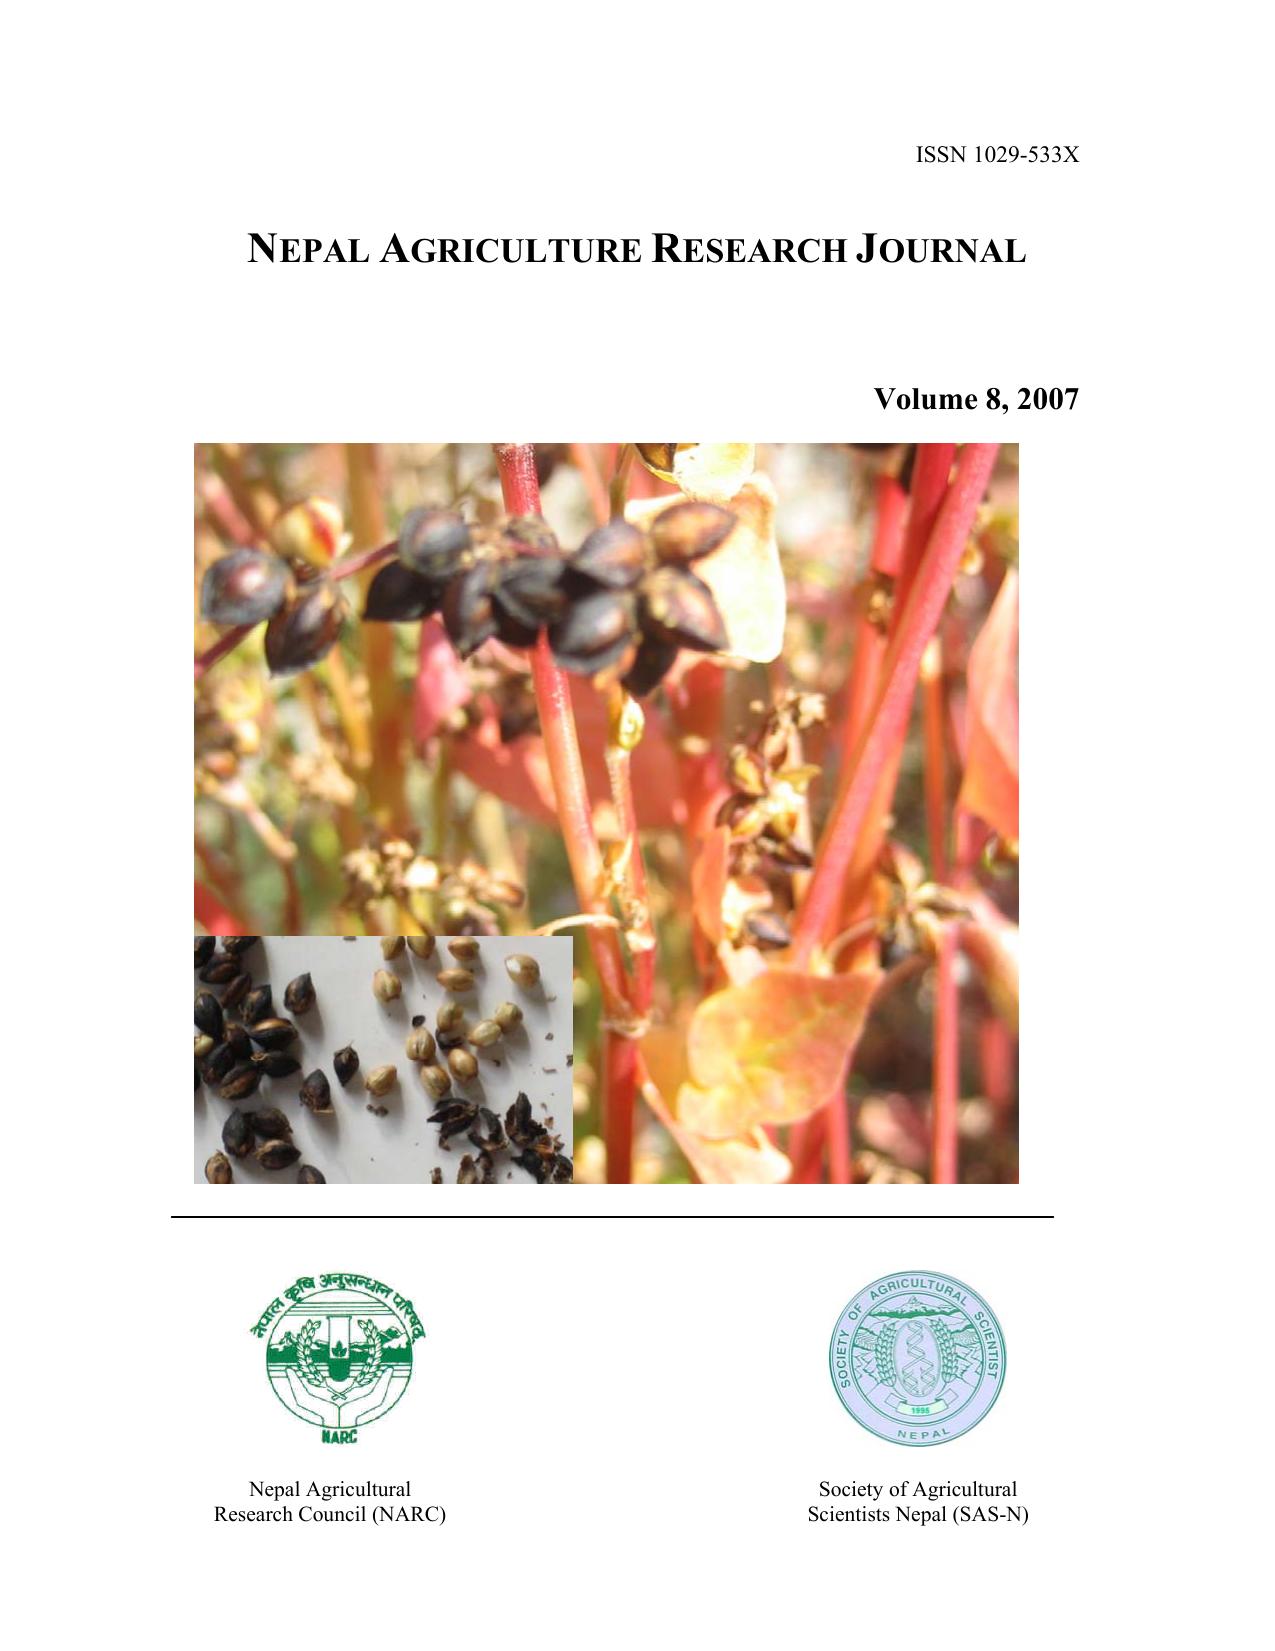 Nepal Agriculture Research Journal Vol8